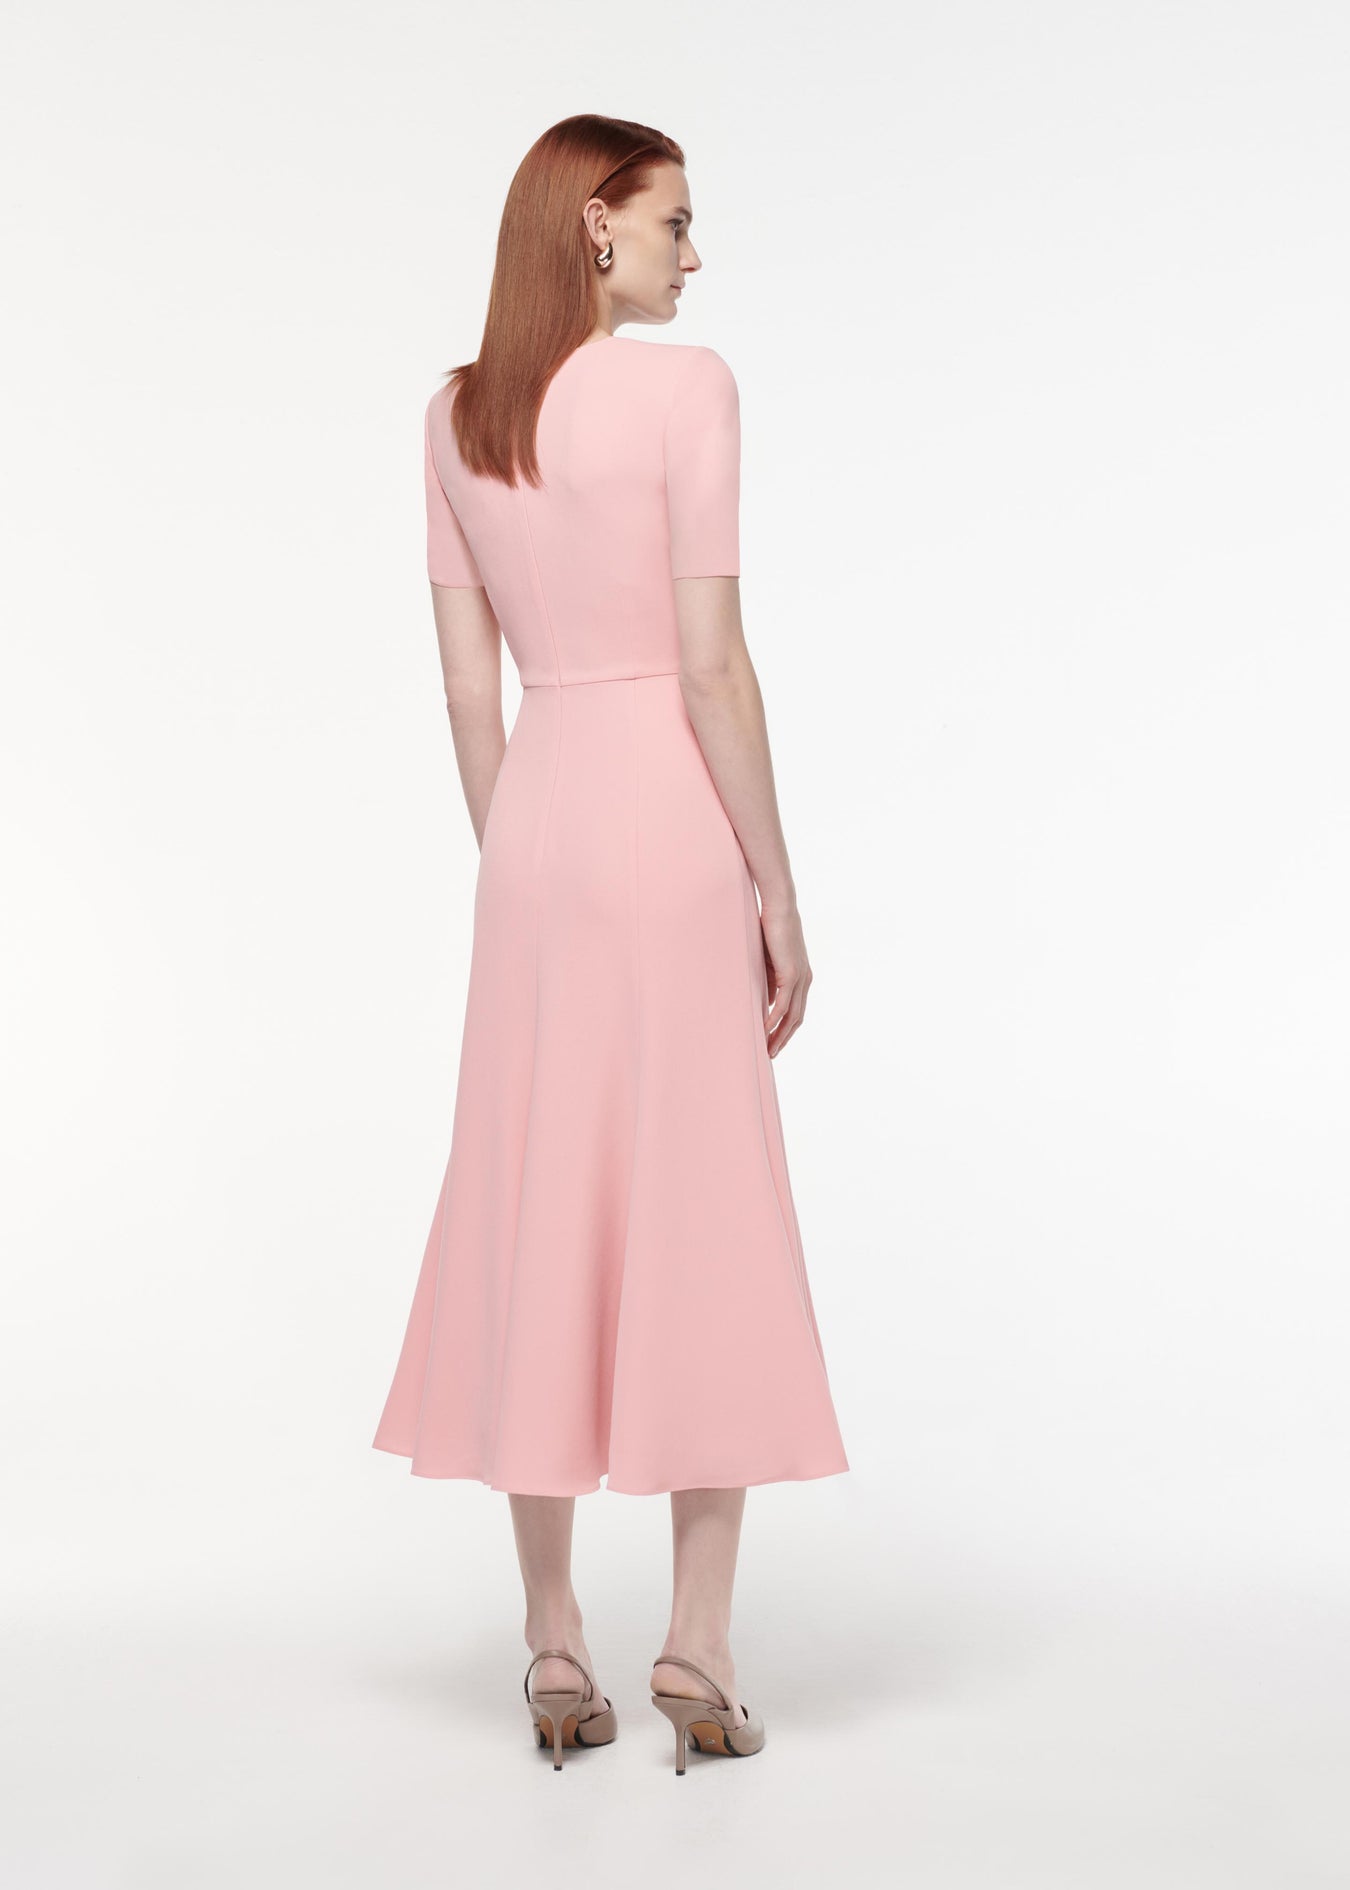 A photograph of a woman wearing a Short Sleeve Light Cady Midi Dress in Pink